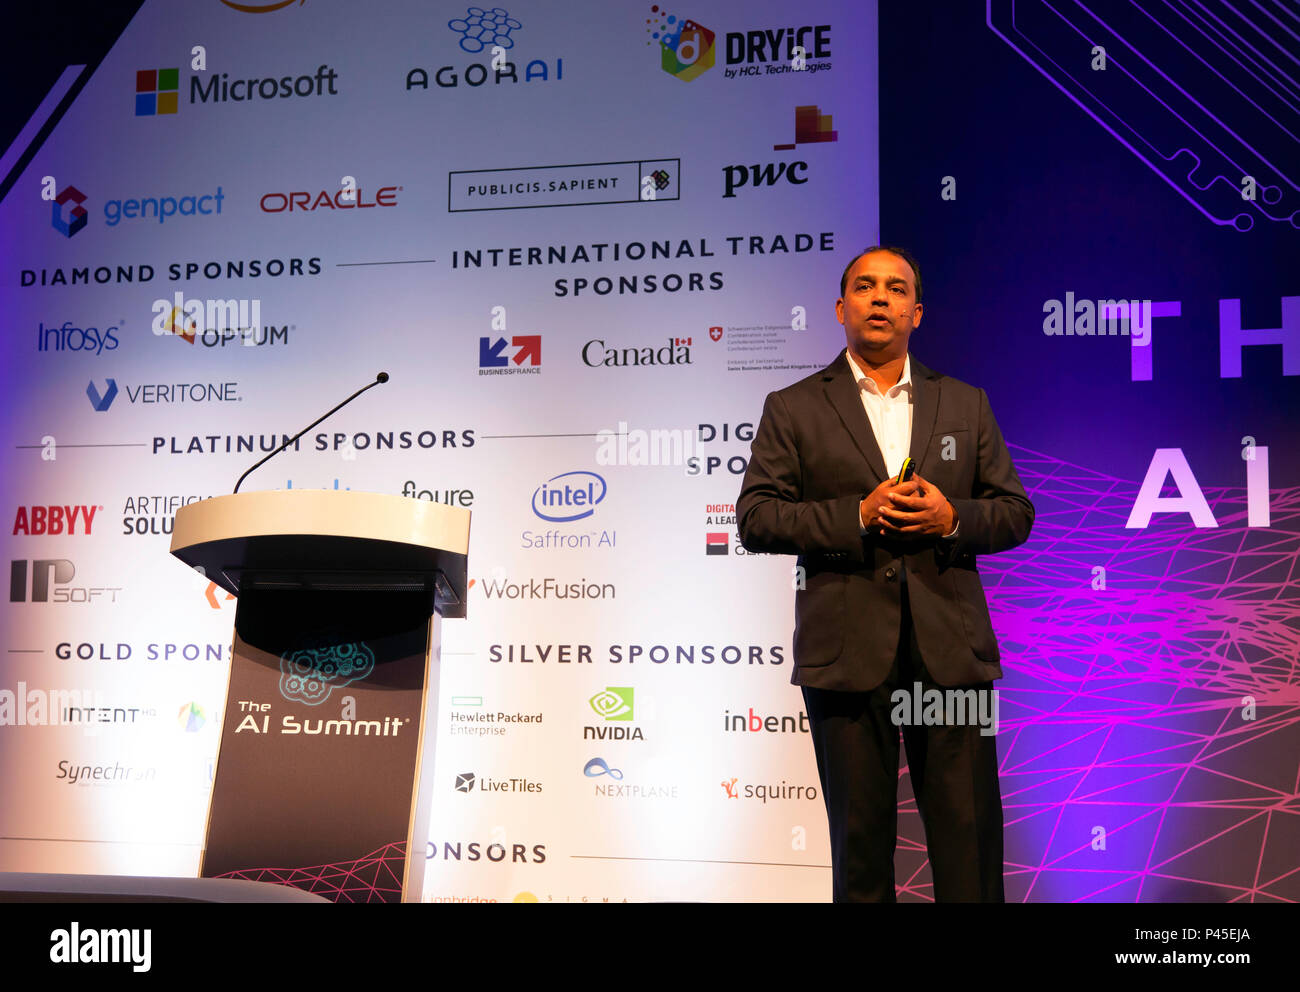 Amit Gupta, SVP and Global GTH Head of DRYiCE, giving a lecture entitled 'Assuring Digital Transformation  with the power of AI, at the AI Summit 2018 Stock Photo